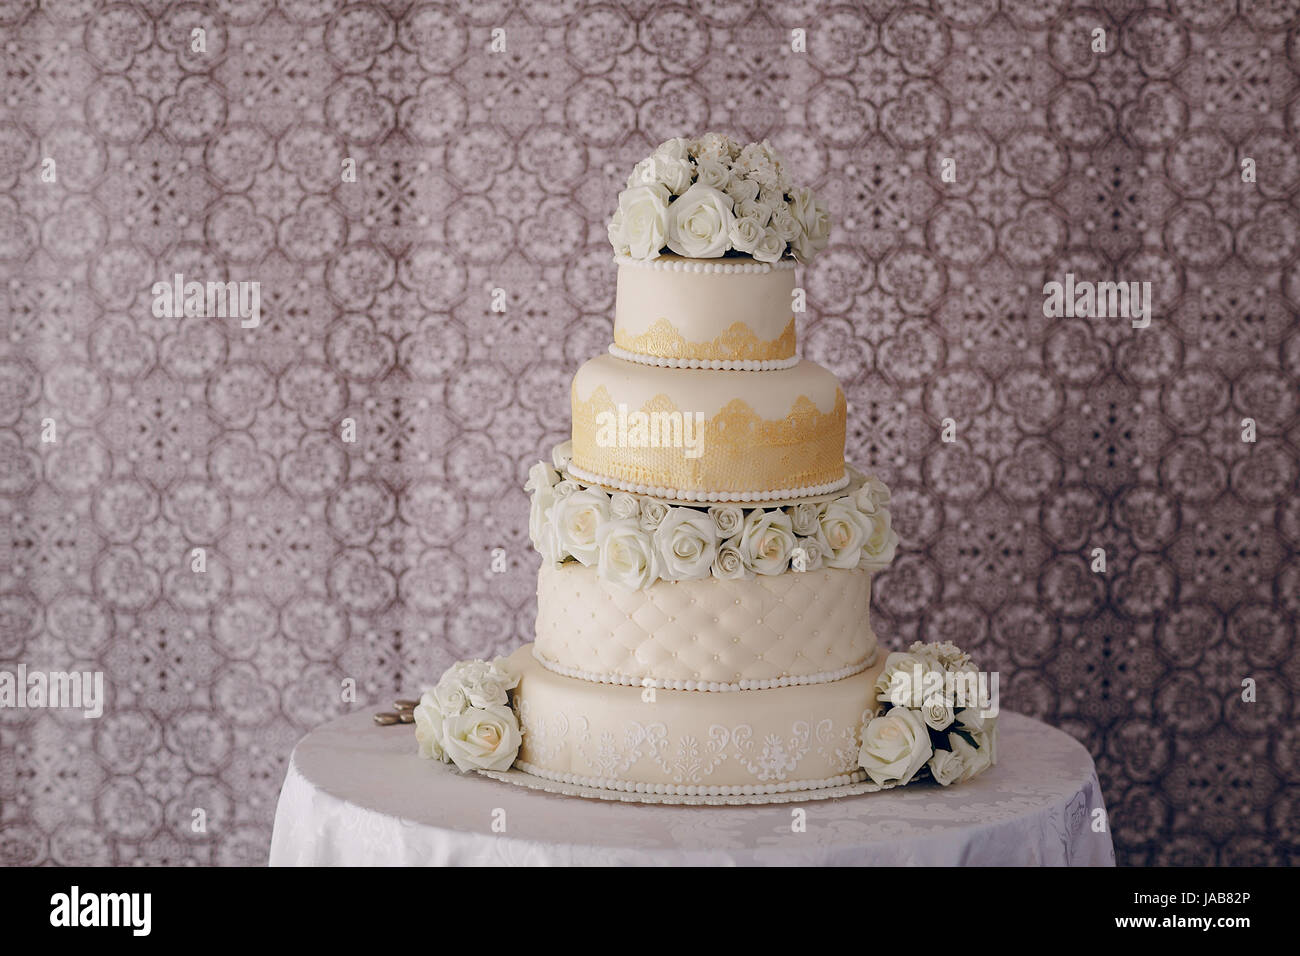 On The Table Is A Large White Wedding Cake Stock Photo 144077326